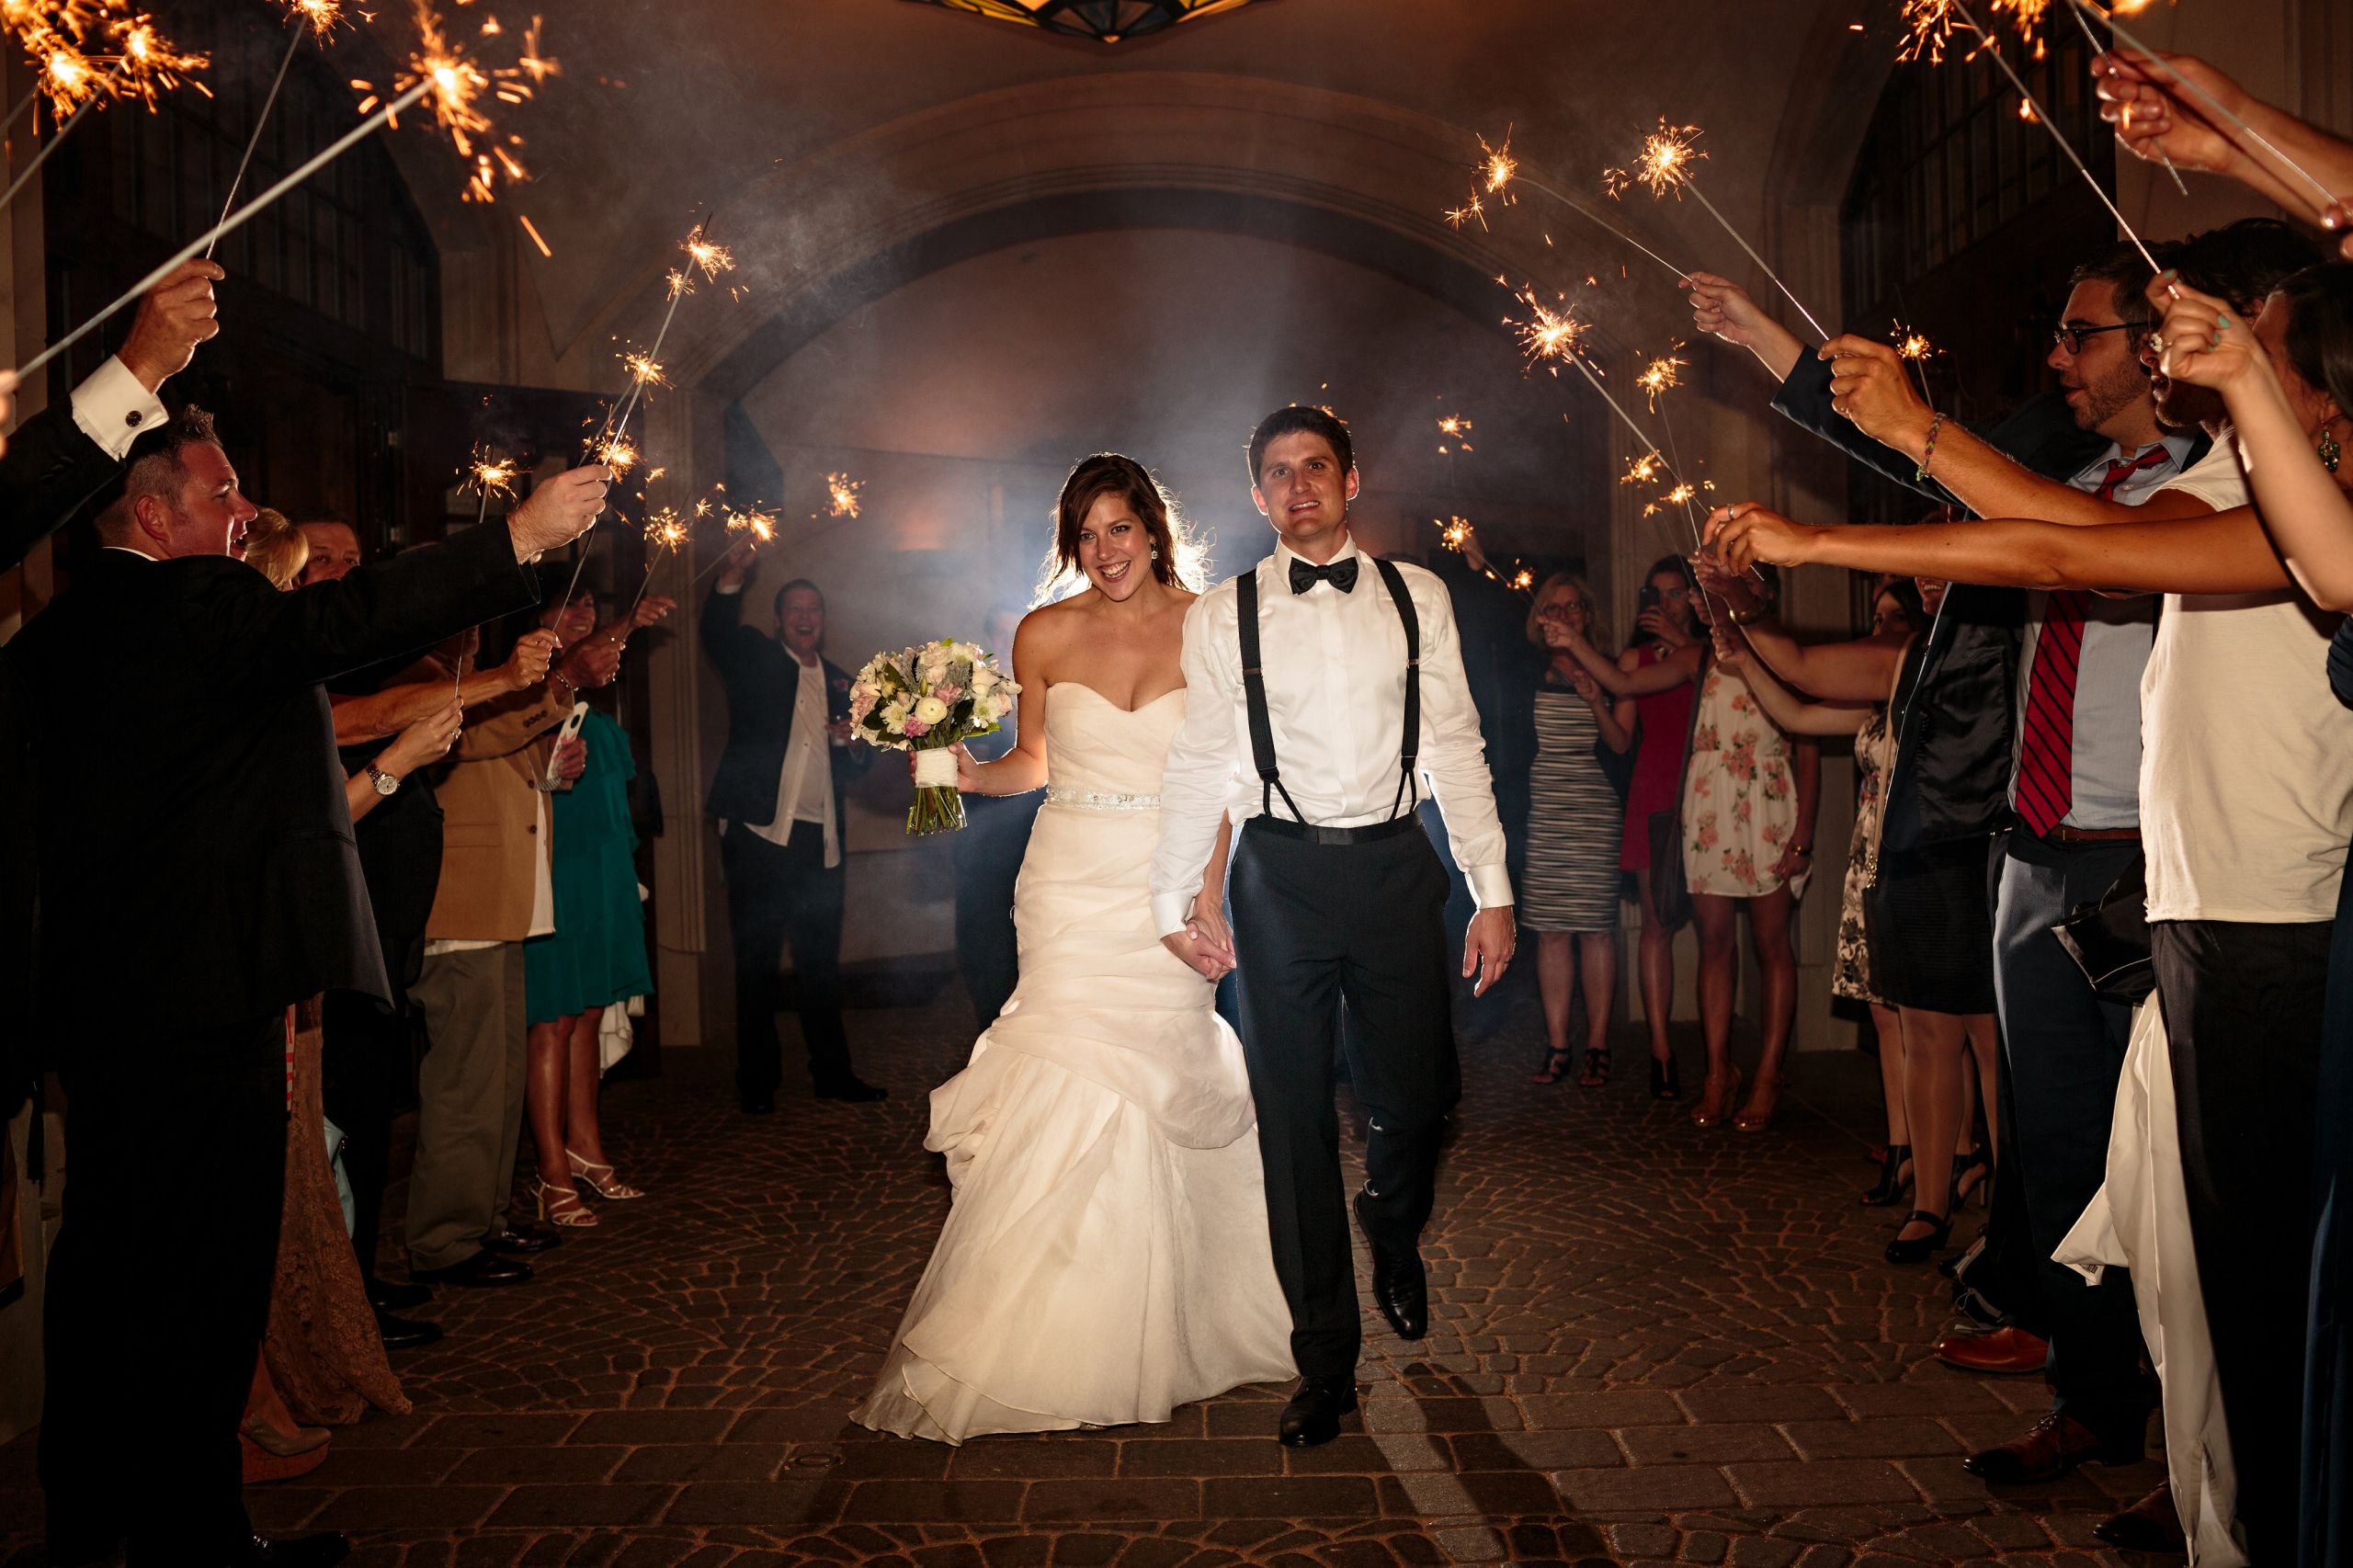 How To Use Sparklers At A Wedding
 Using Sparklers at Weddings